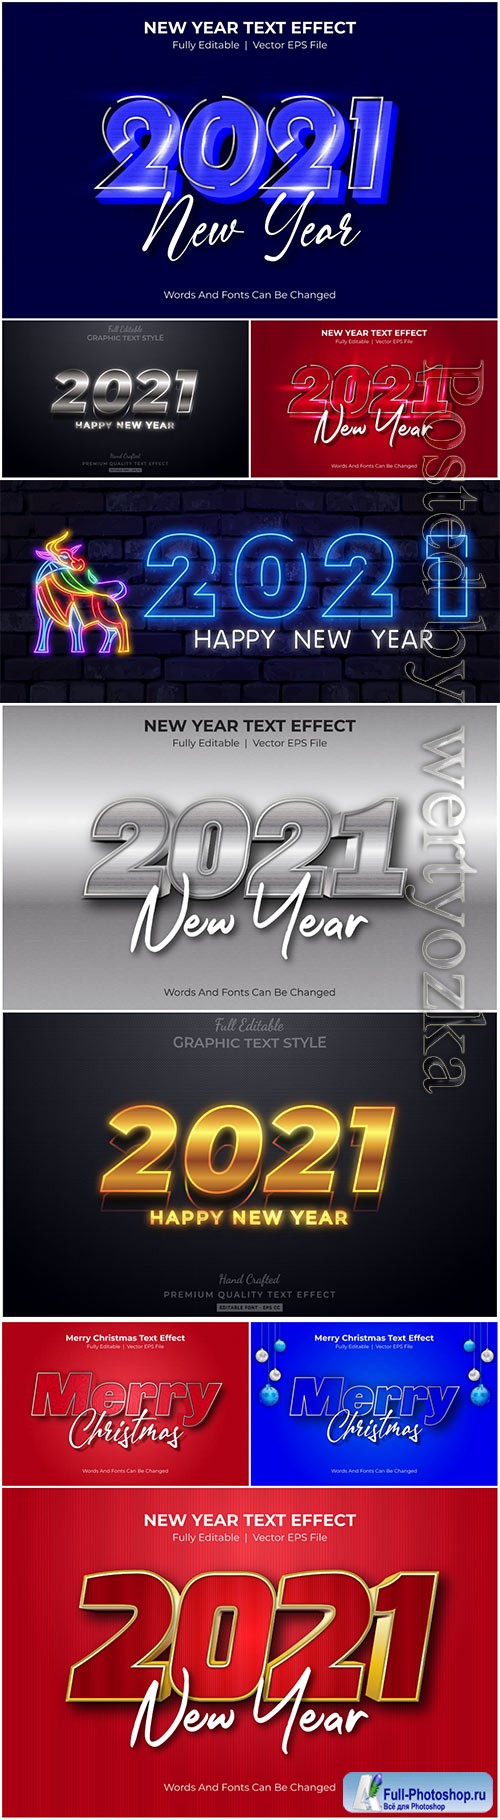 New year editable text style effect